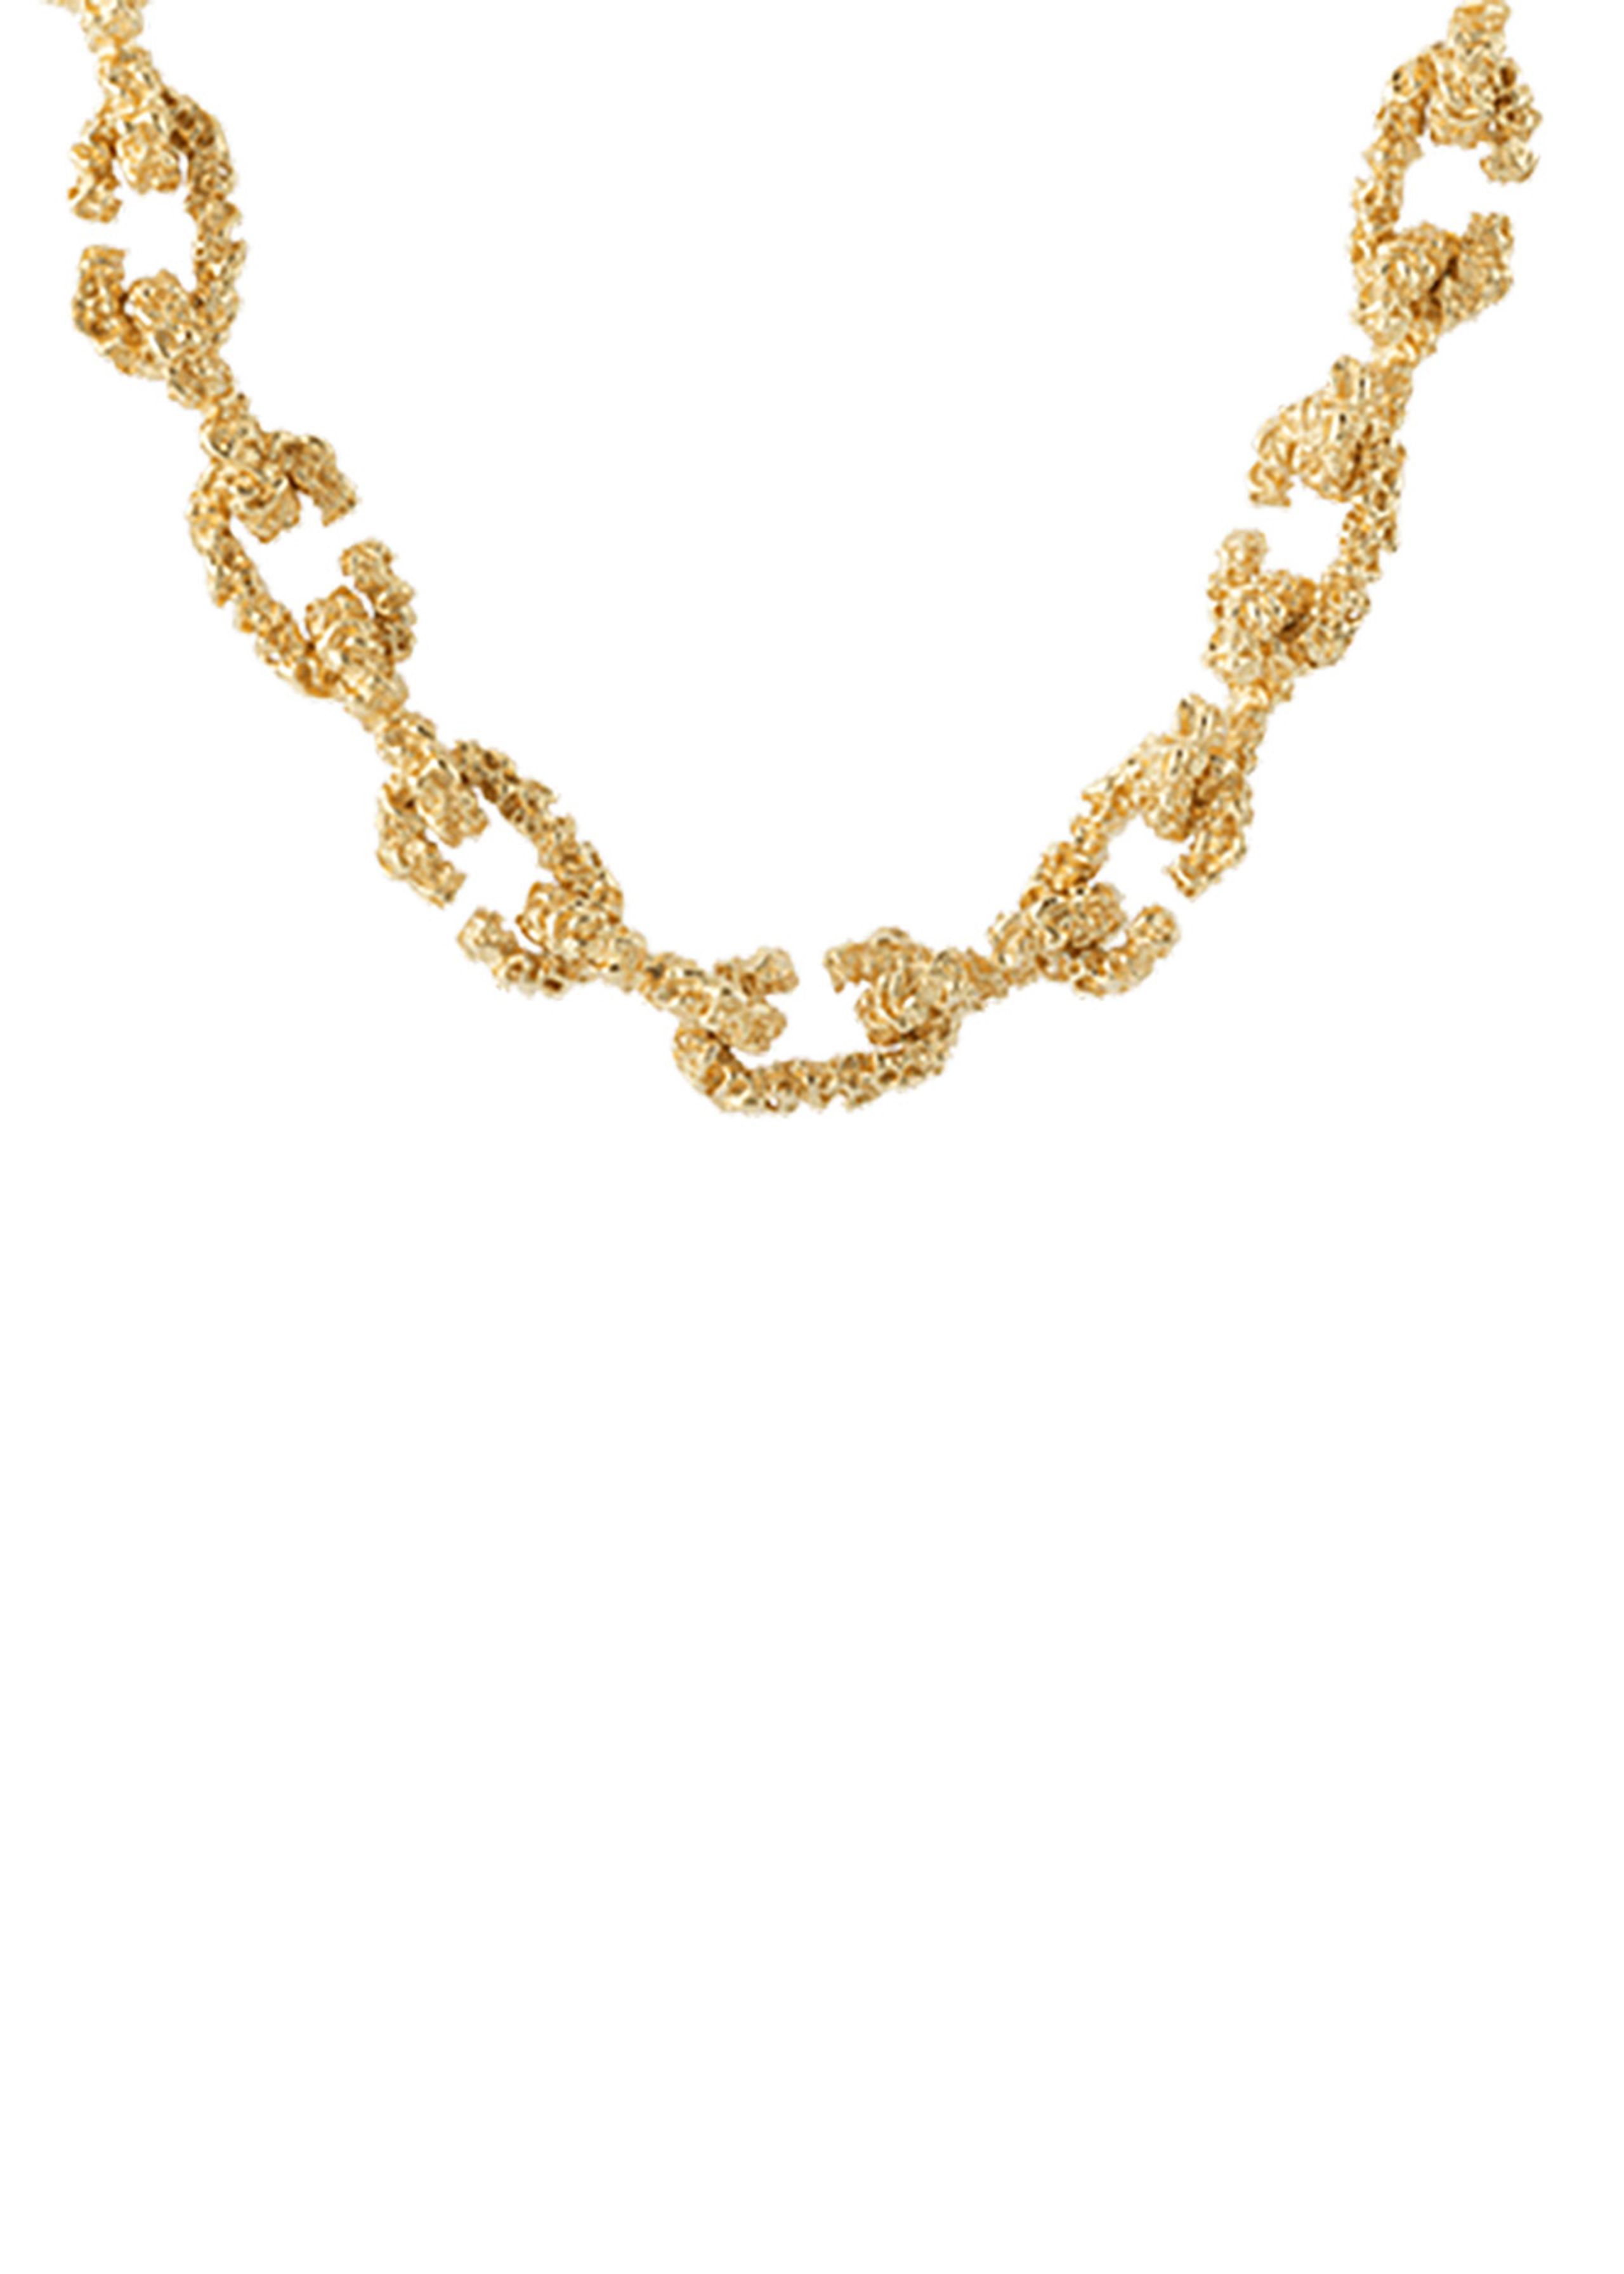 House of Vincent - Halskette - Chain Of Riddle Necklace - Gold